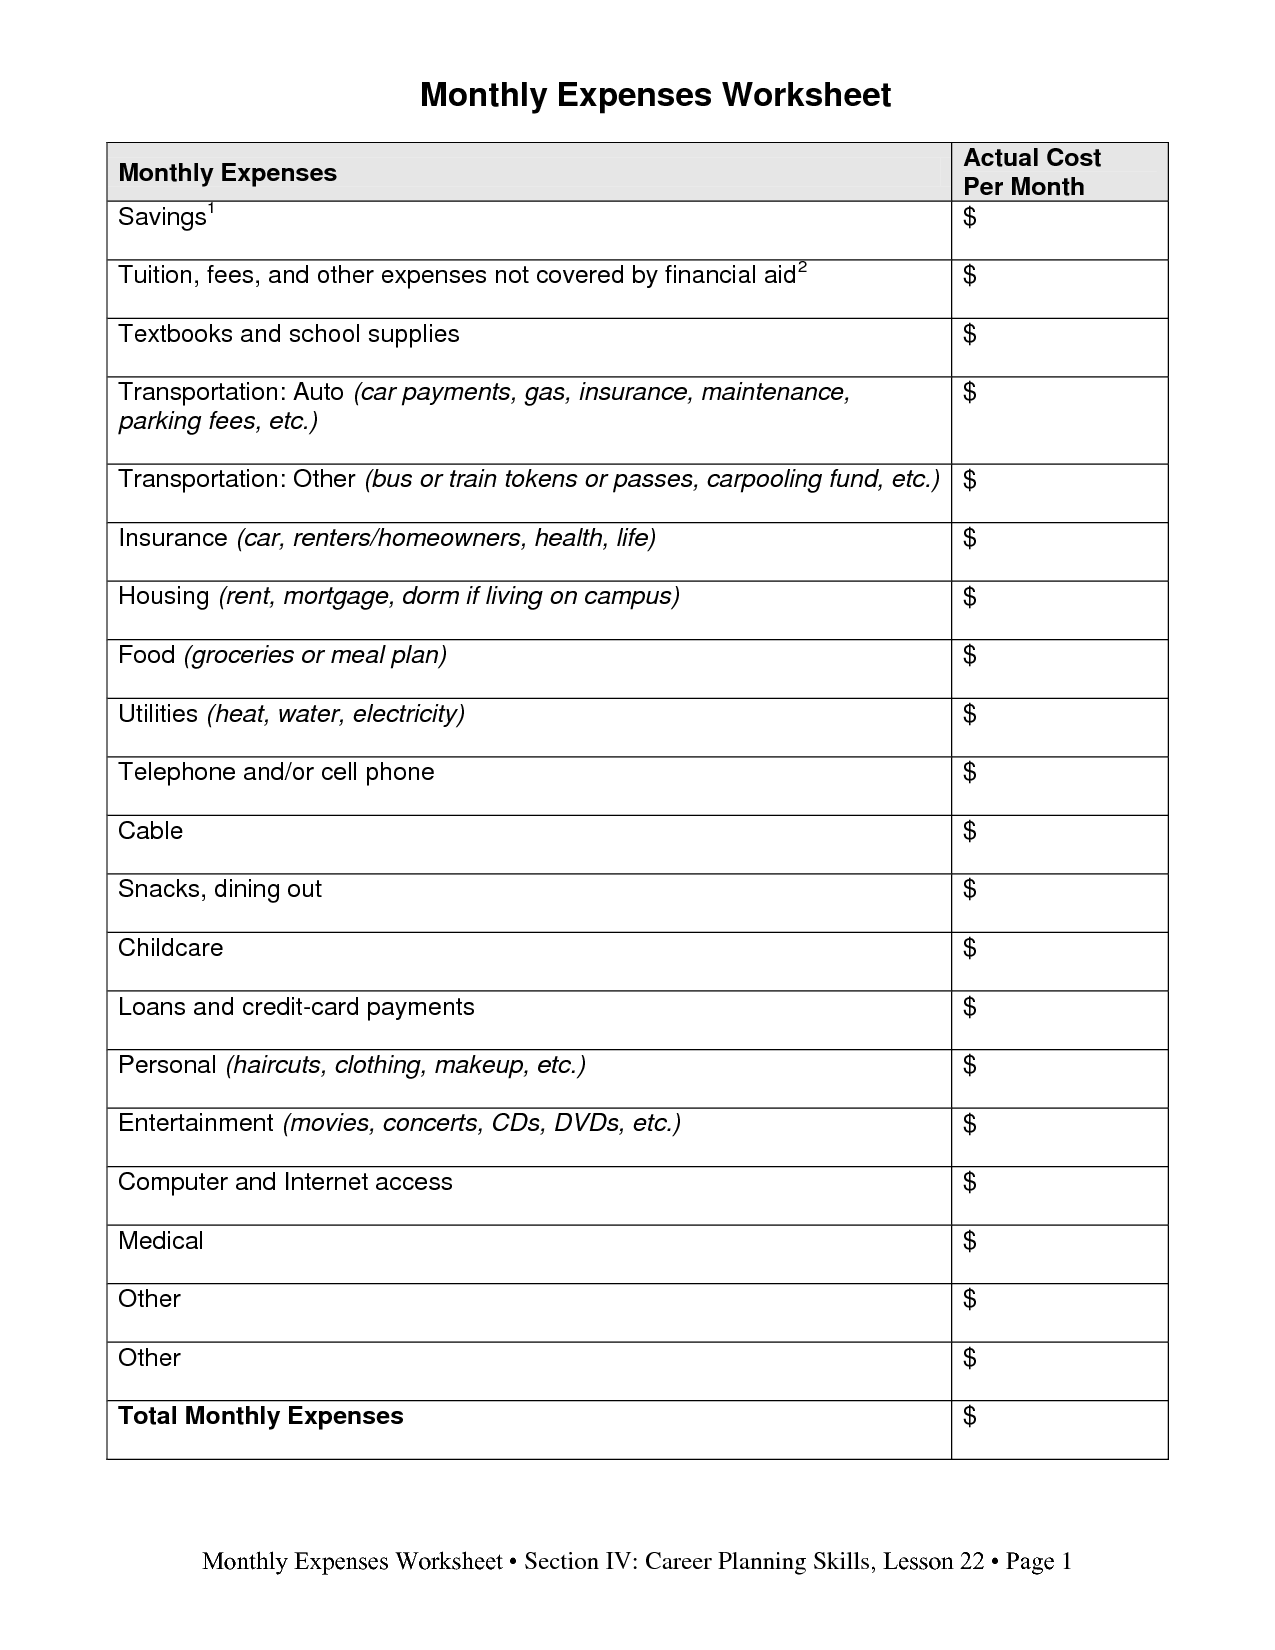 Monthly Expense Worksheet